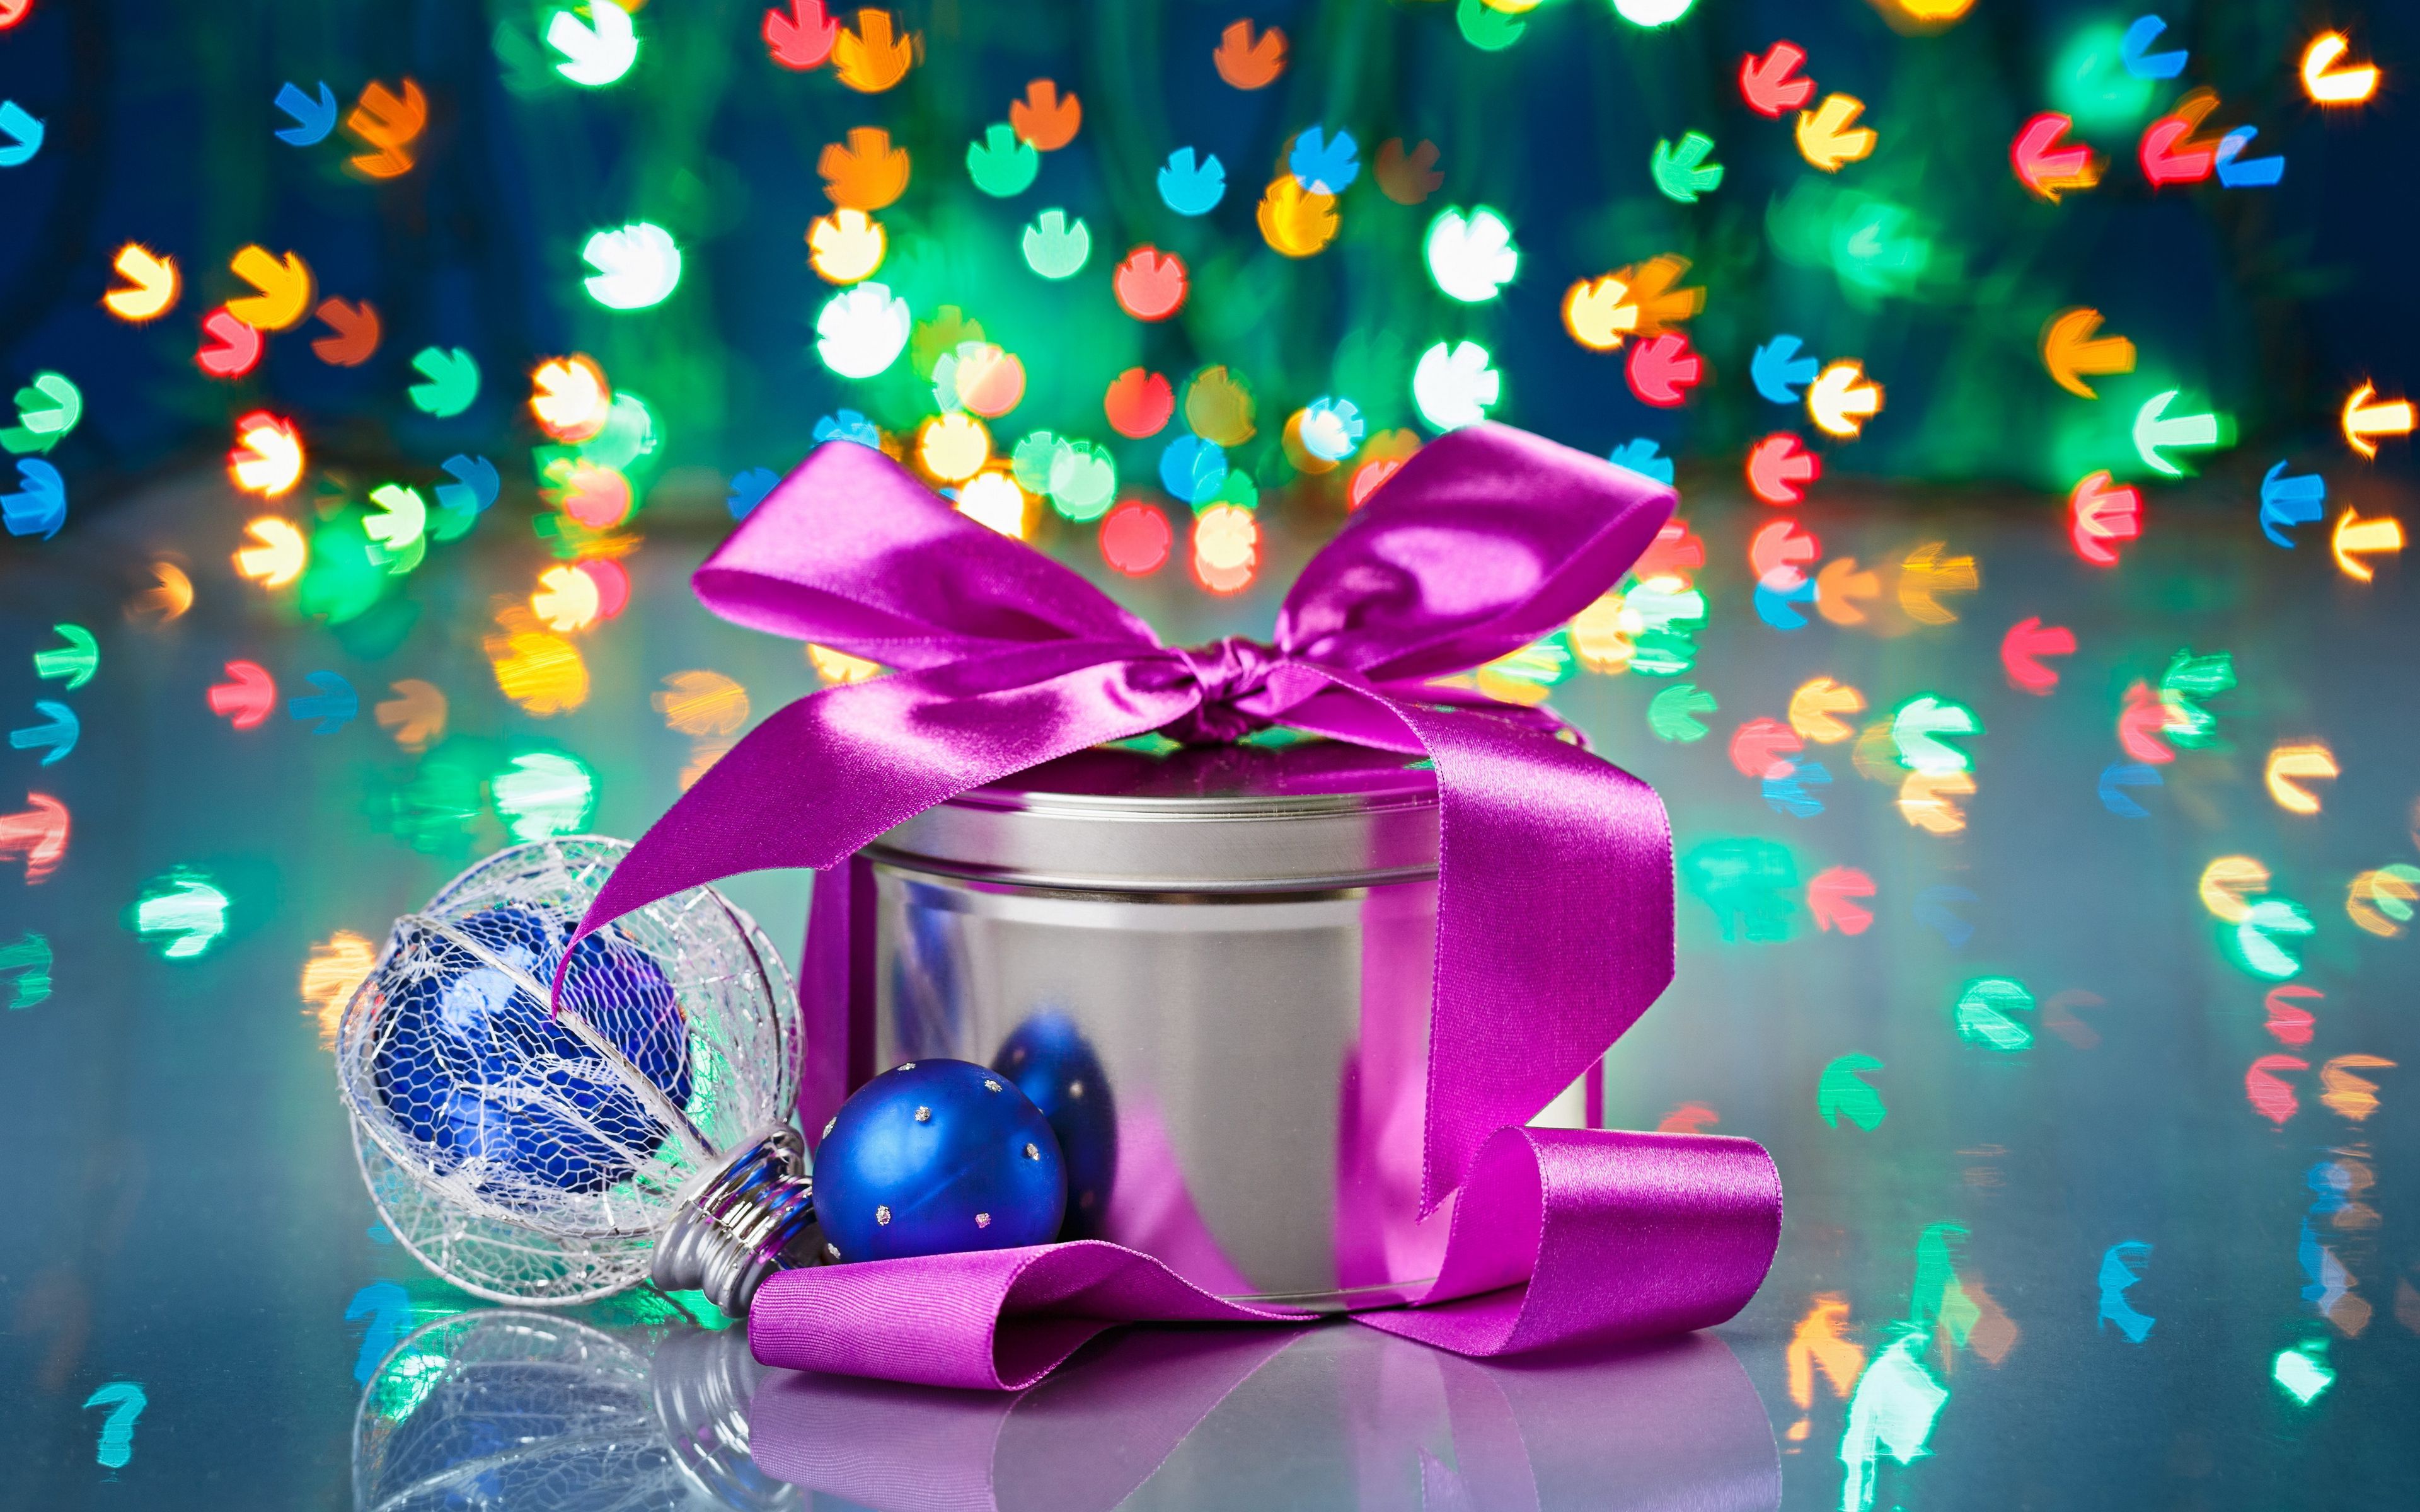 Download wallpaper 3840x2400 metal, bank, gift, new year, reflections, bow 4k ultra HD 16:10 HD background